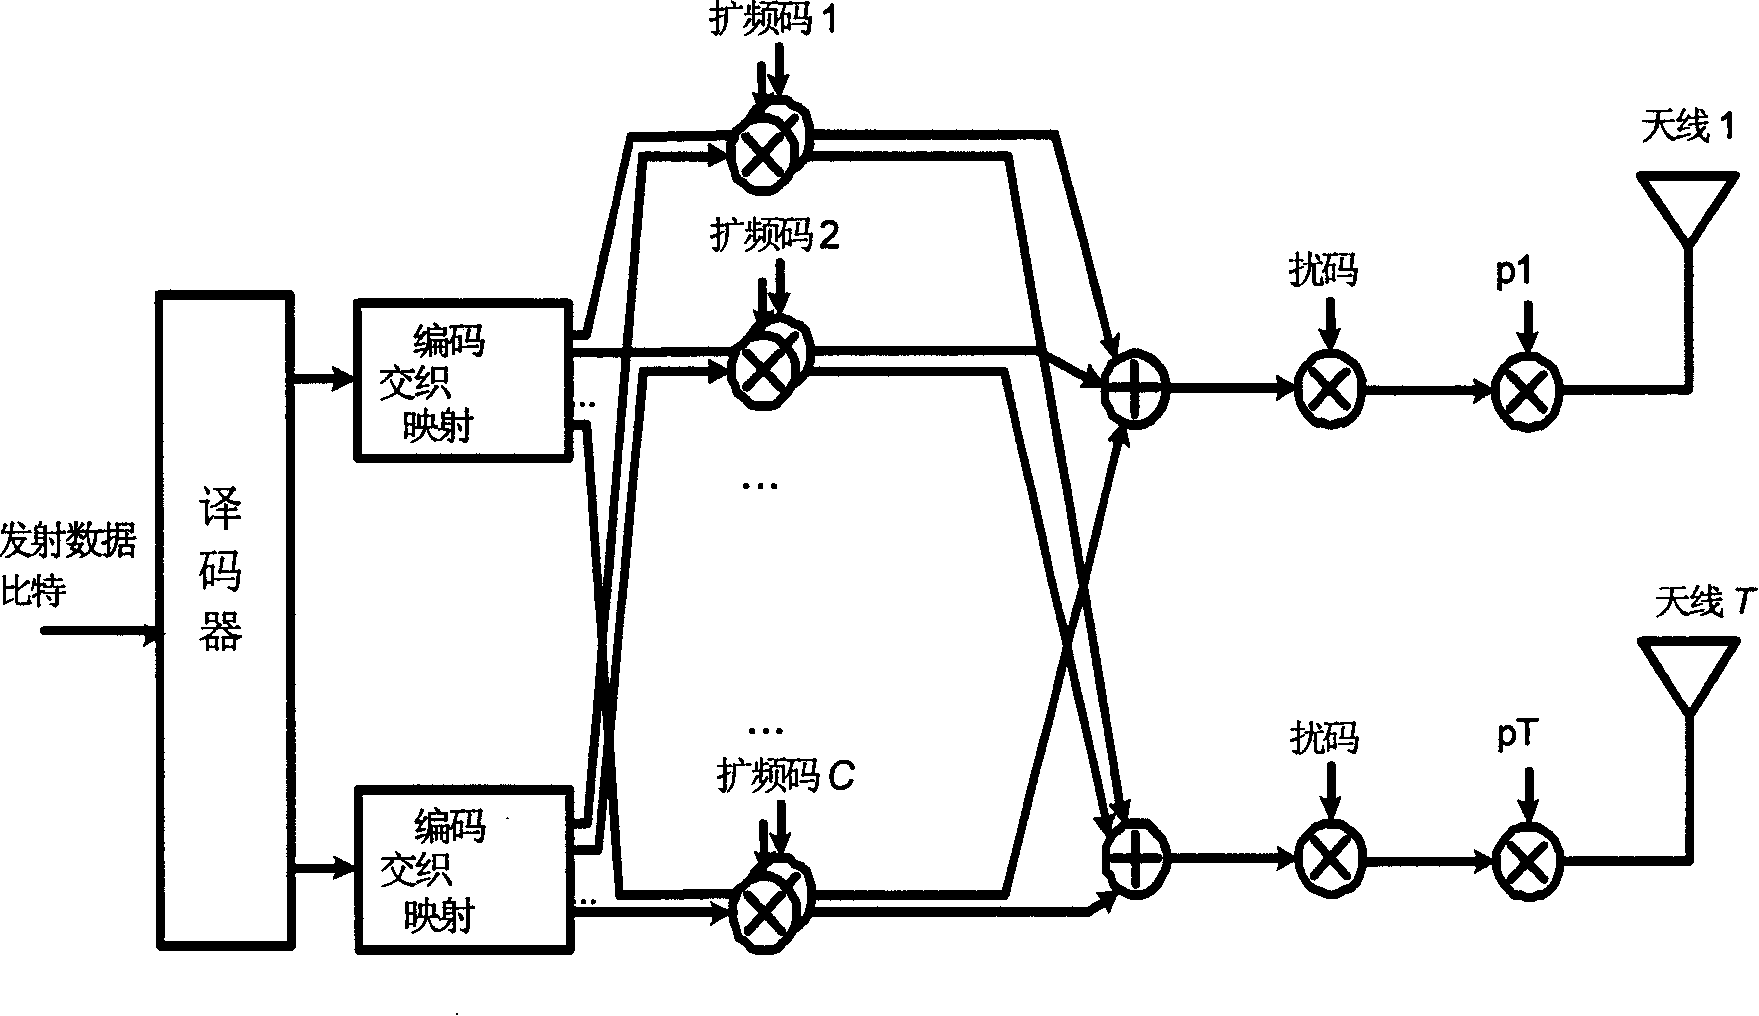 An antenna rate control method and system